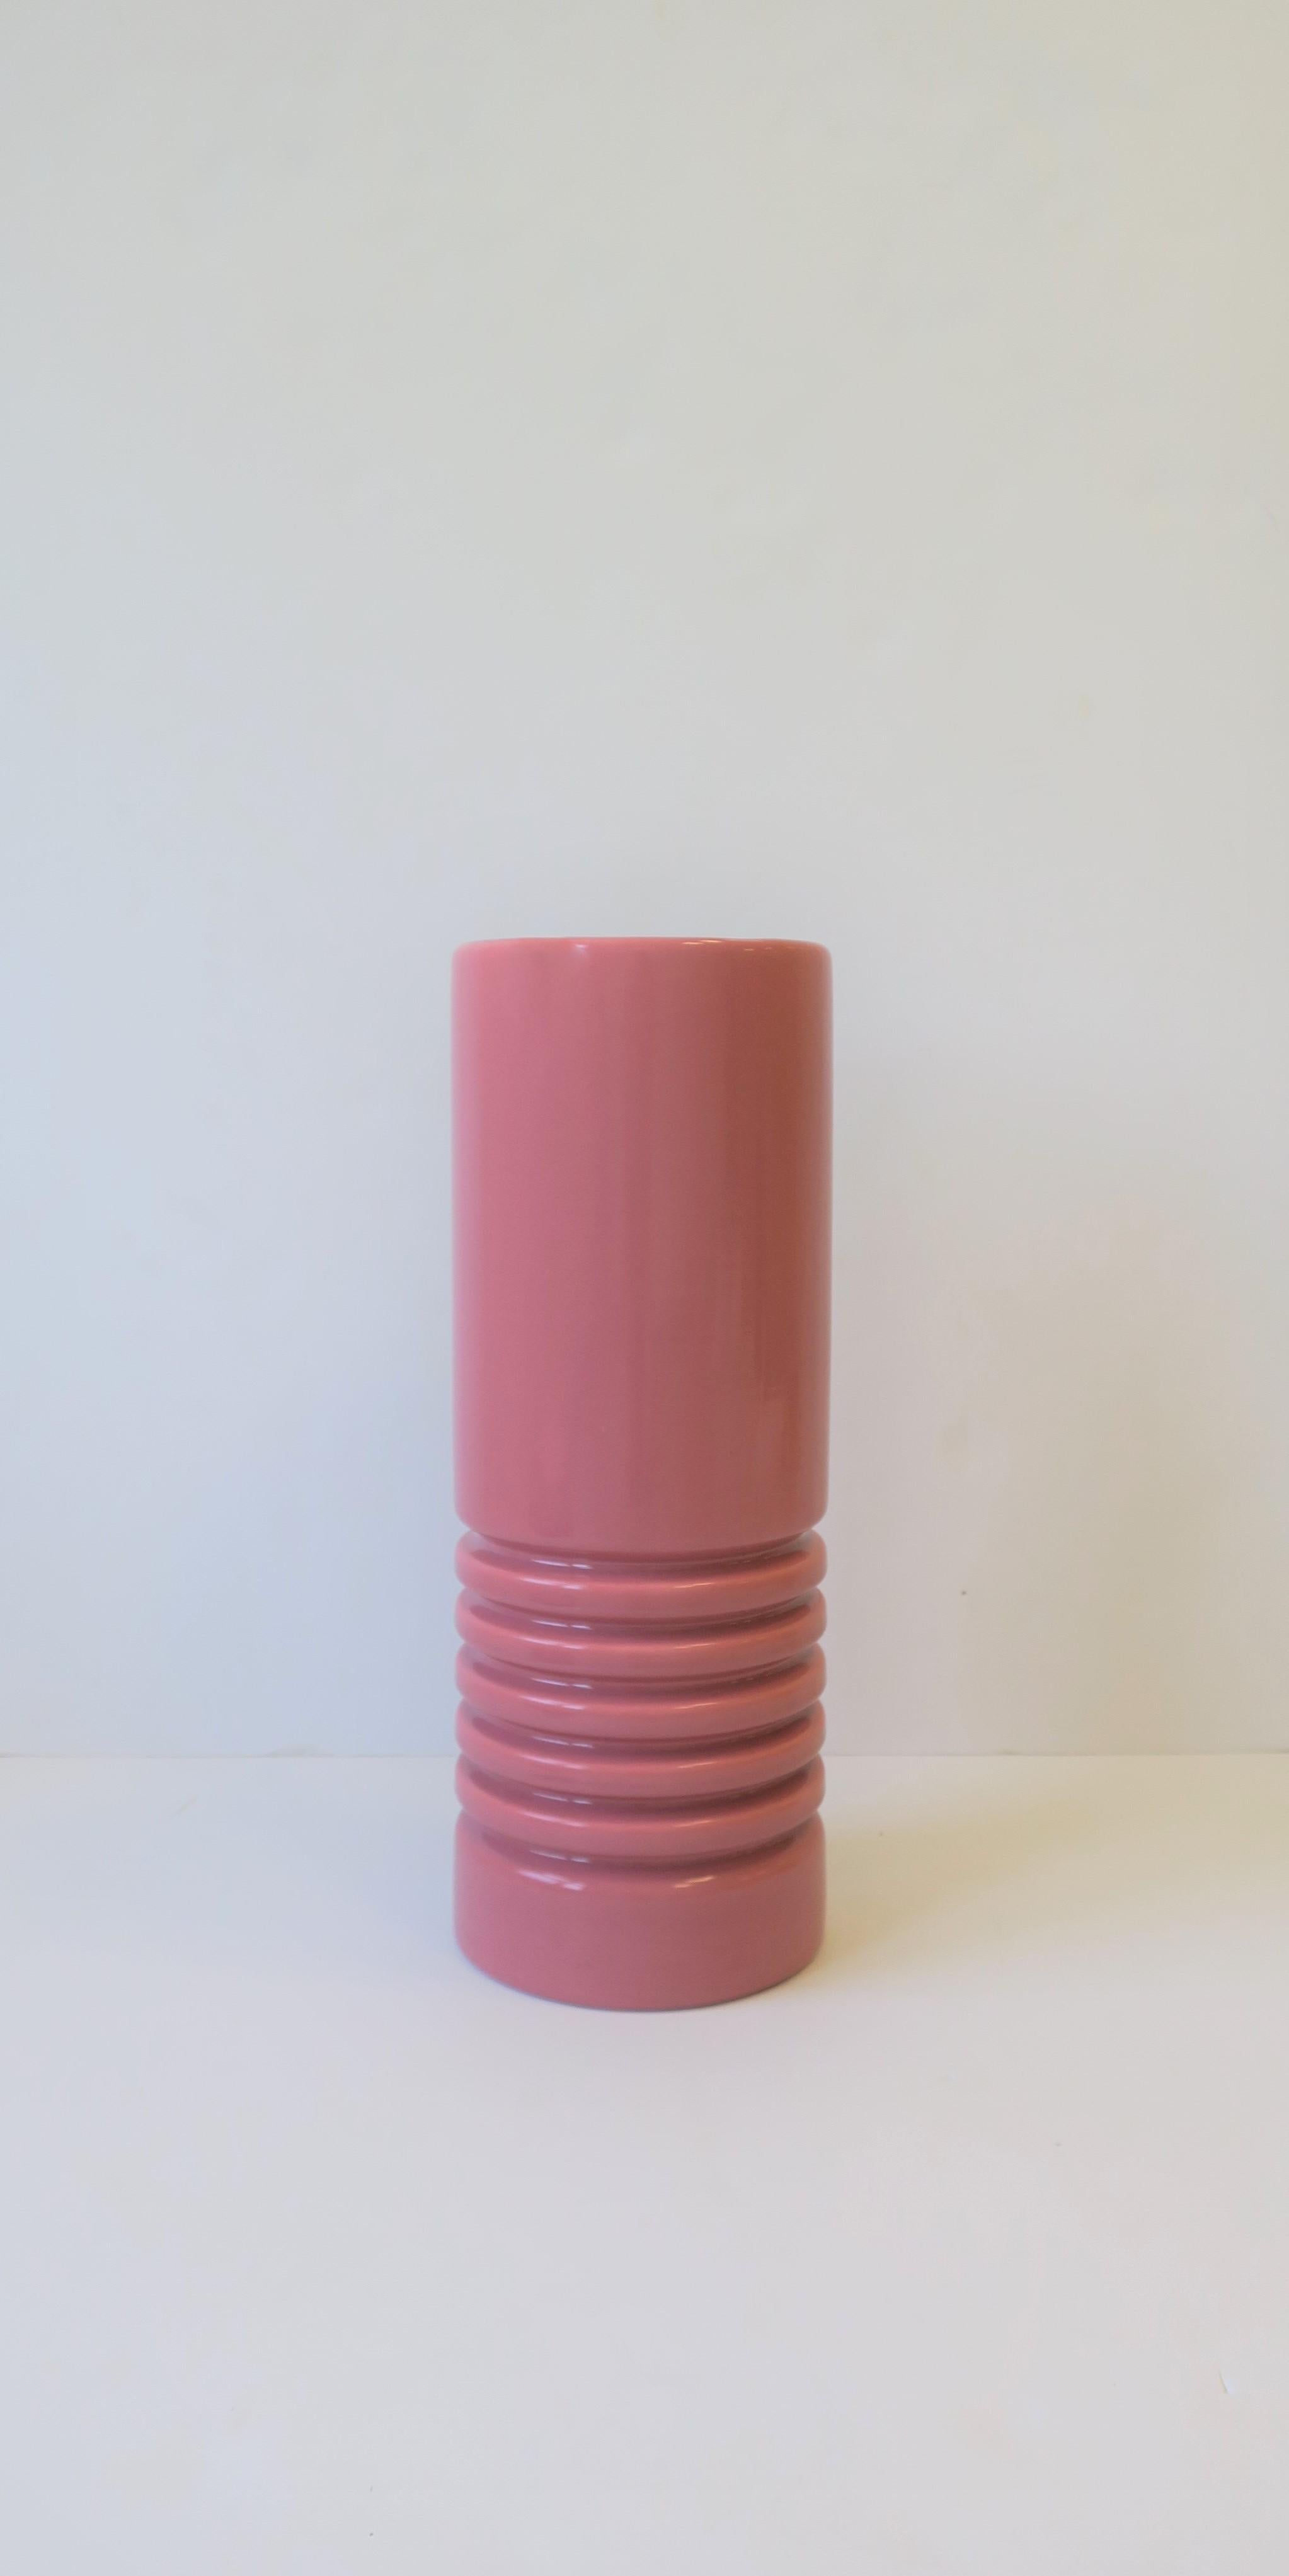 A very beautiful, relatively tall, Post-Modern period or Modern/Art Deco style pink ceramic vase by Haeger pottery, circa 1980s, USA. With maker's mark on bottom as show in image #9. Very clean inside, appears to have never been used.

Vase